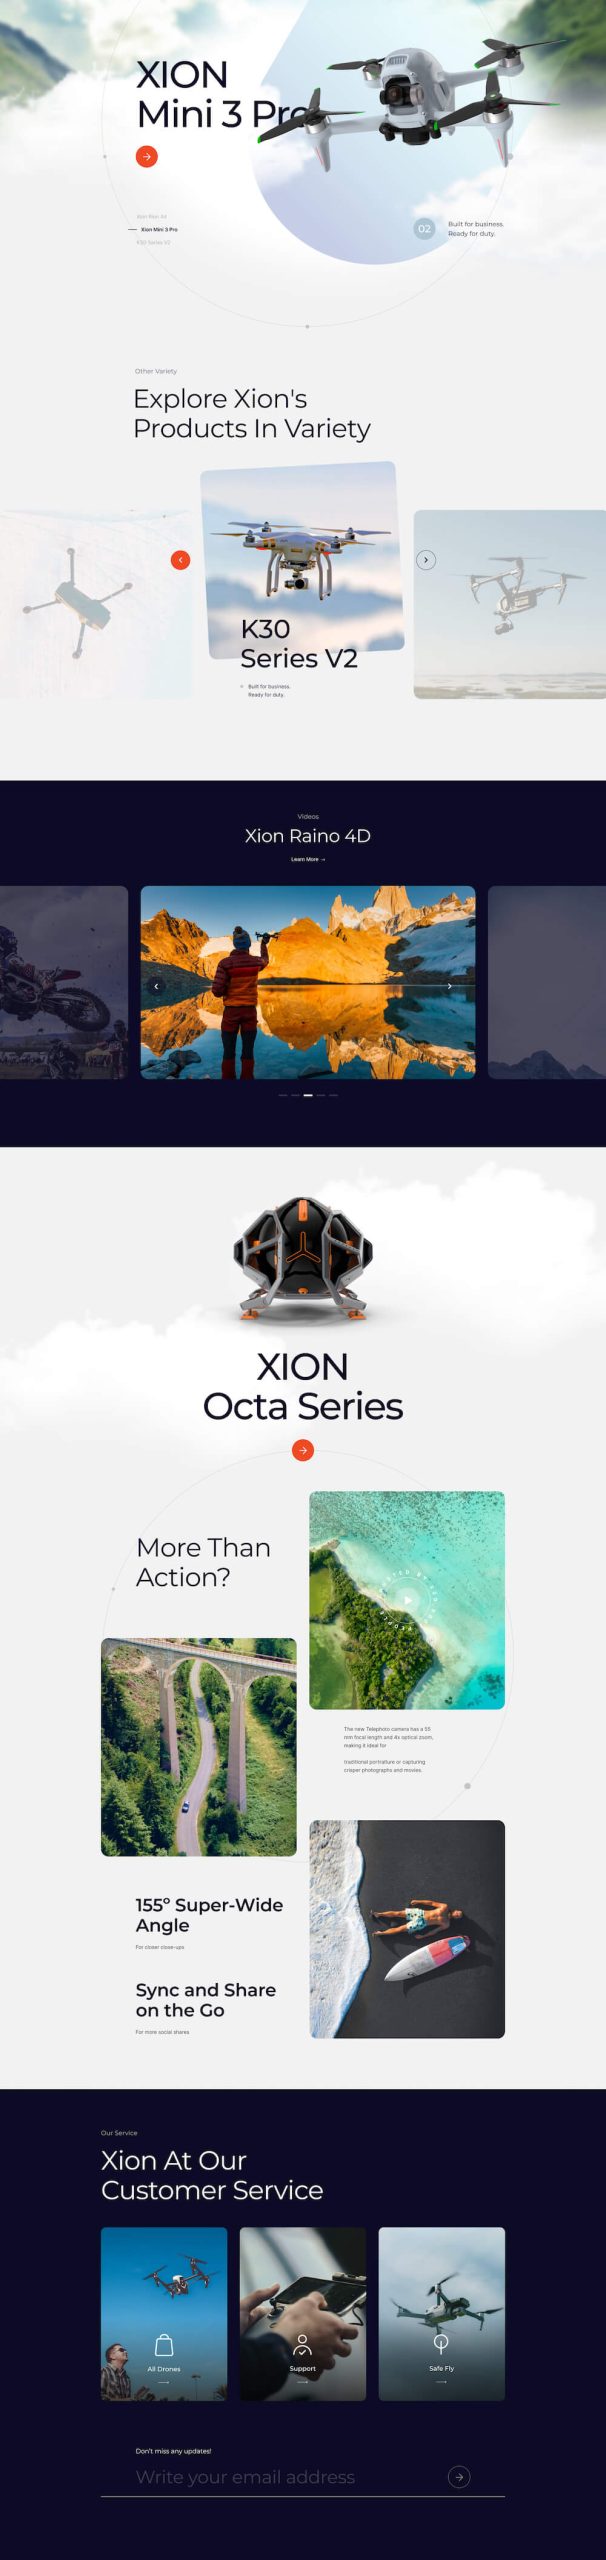 Introducing Xion - A Free Layout Bundle for SP Page Builder Pro